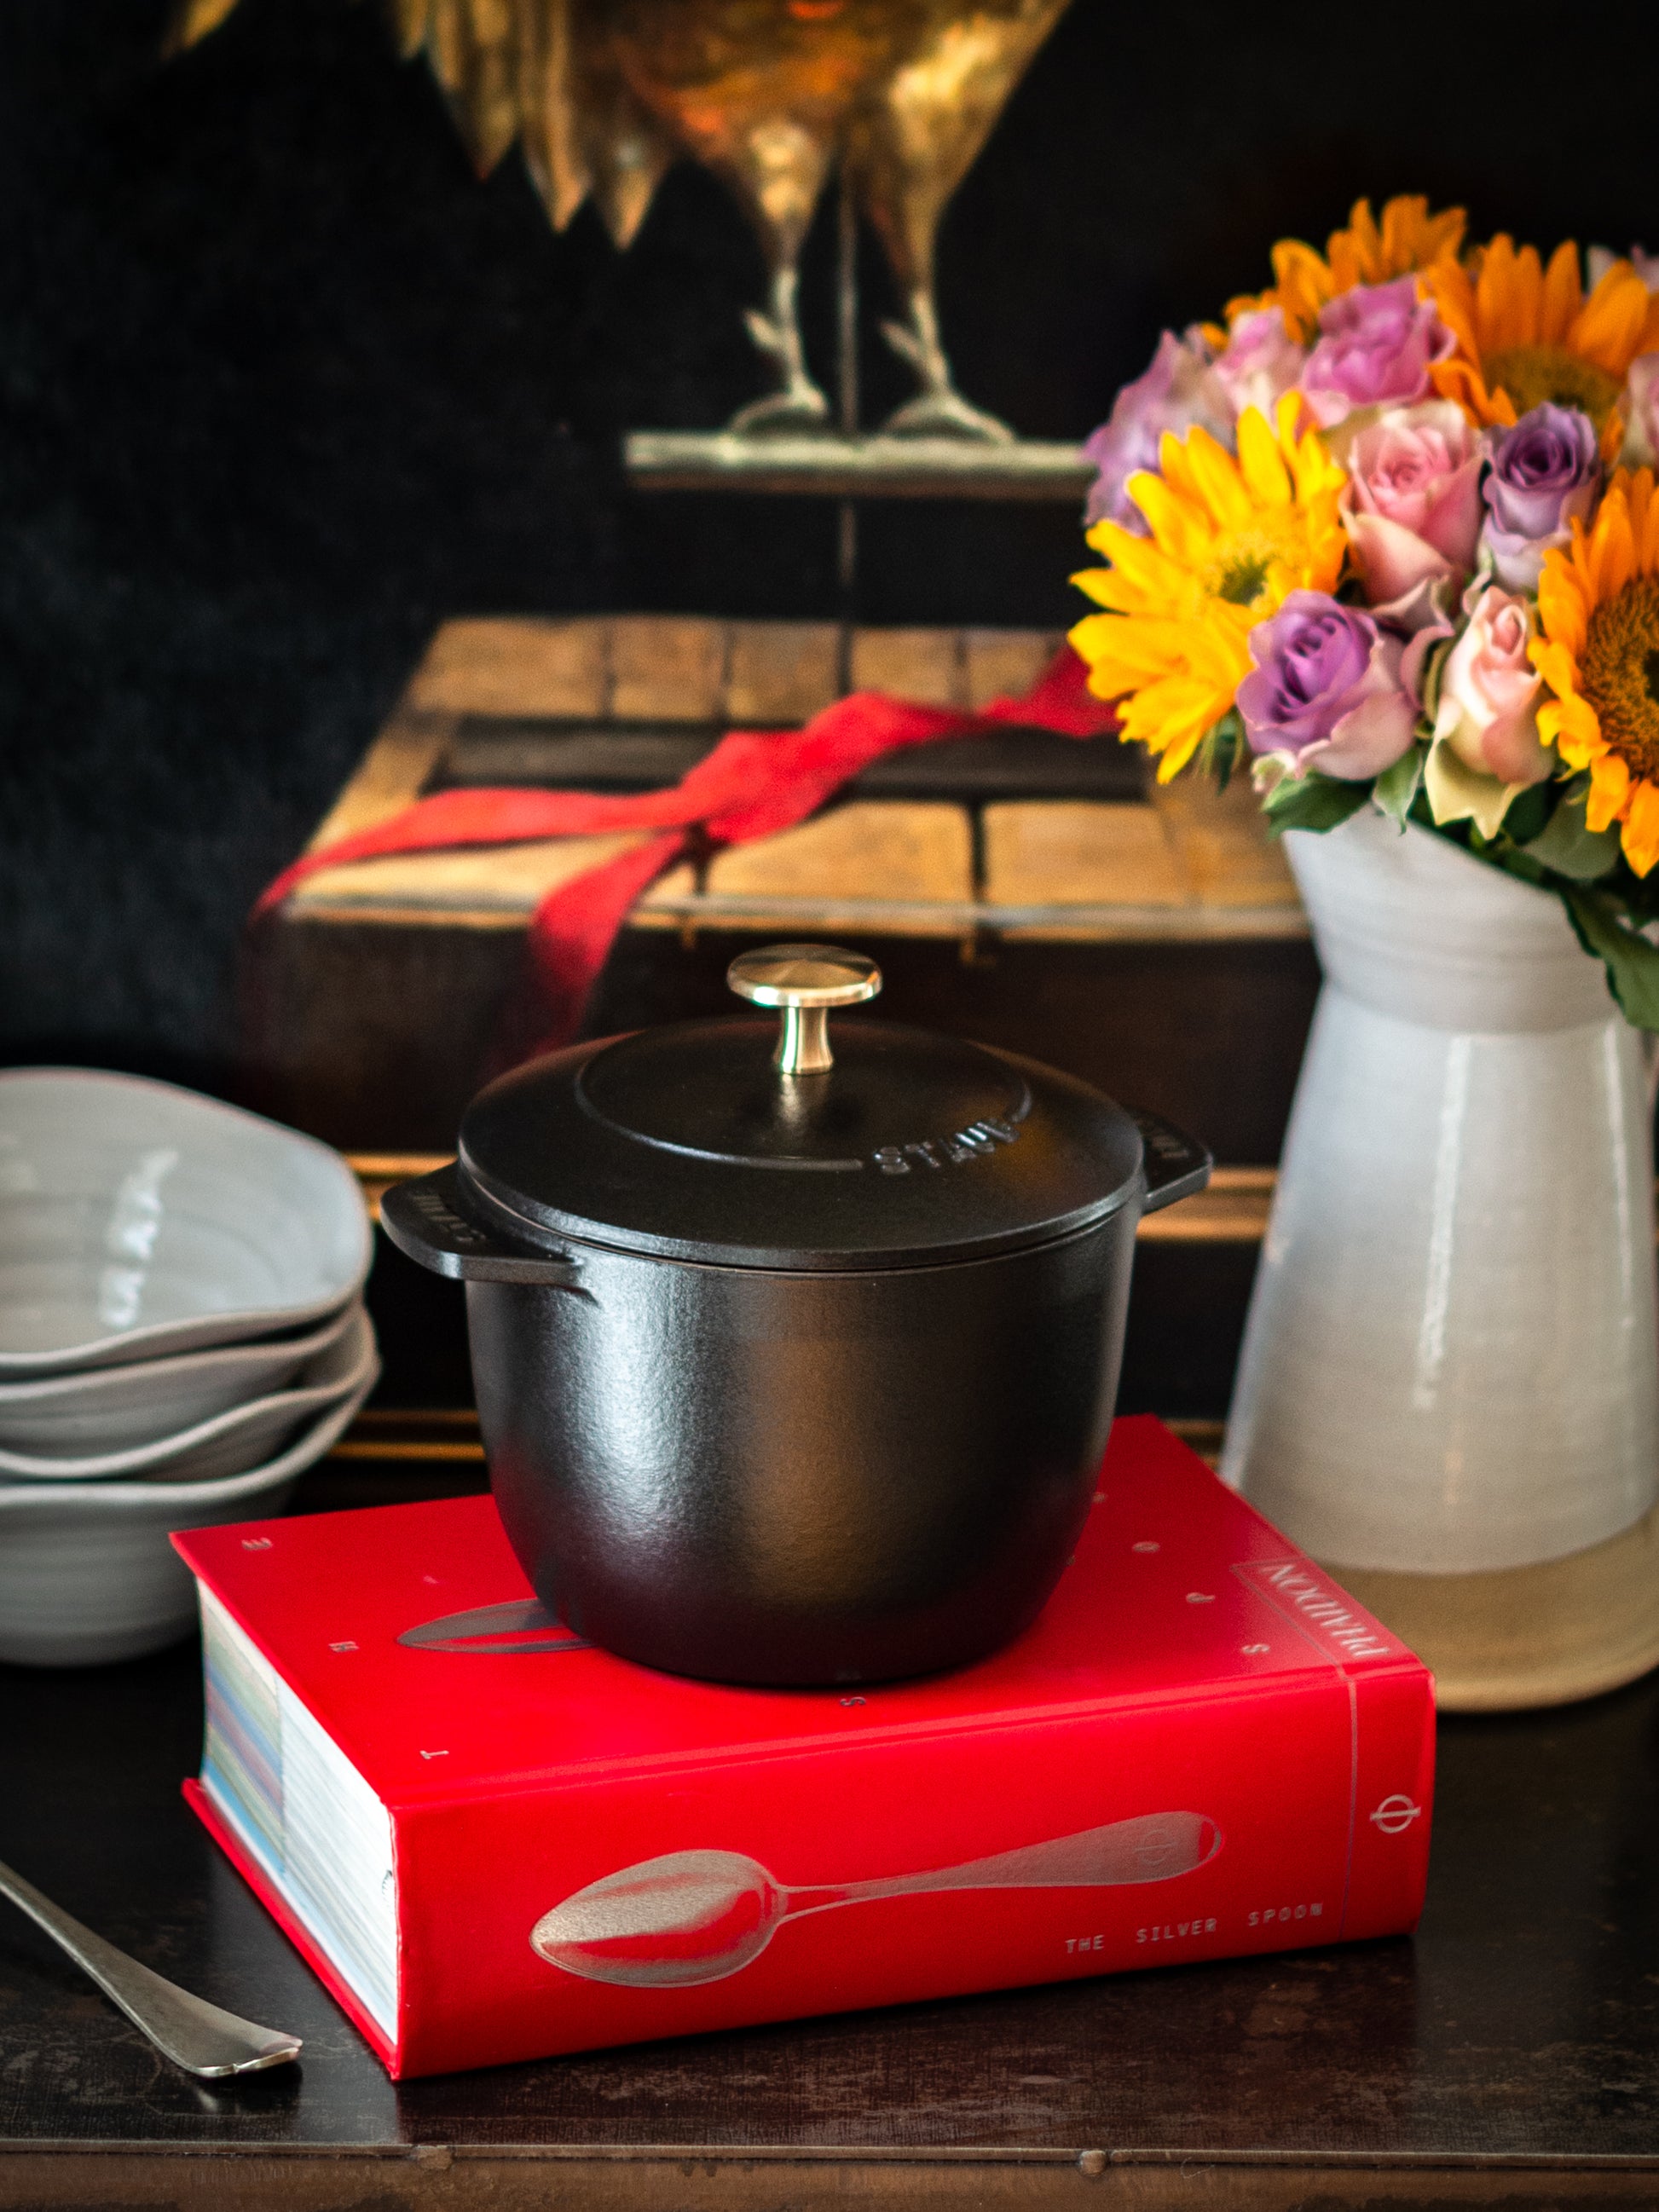  Staub Cast Iron 1.5-qt Petite French Oven - Matte Black, Made  in France: Home & Kitchen